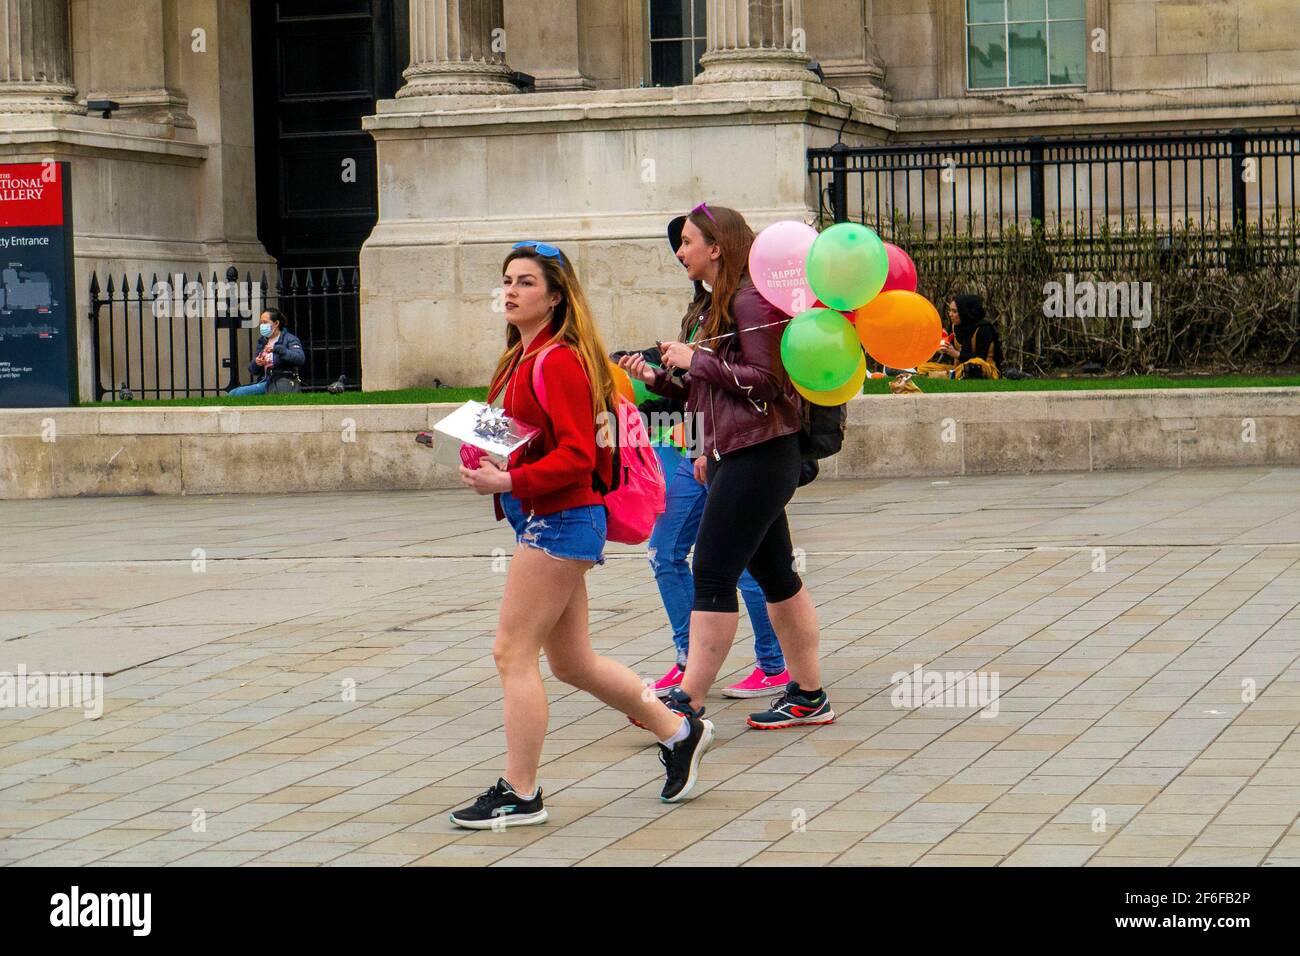 London, UK. 31st Mar, 2021. Cloudy warm day in Trafalgar Square on last day of March. Credit: JOHNNY ARMSTEAD/Alamy Live News Stock Photo